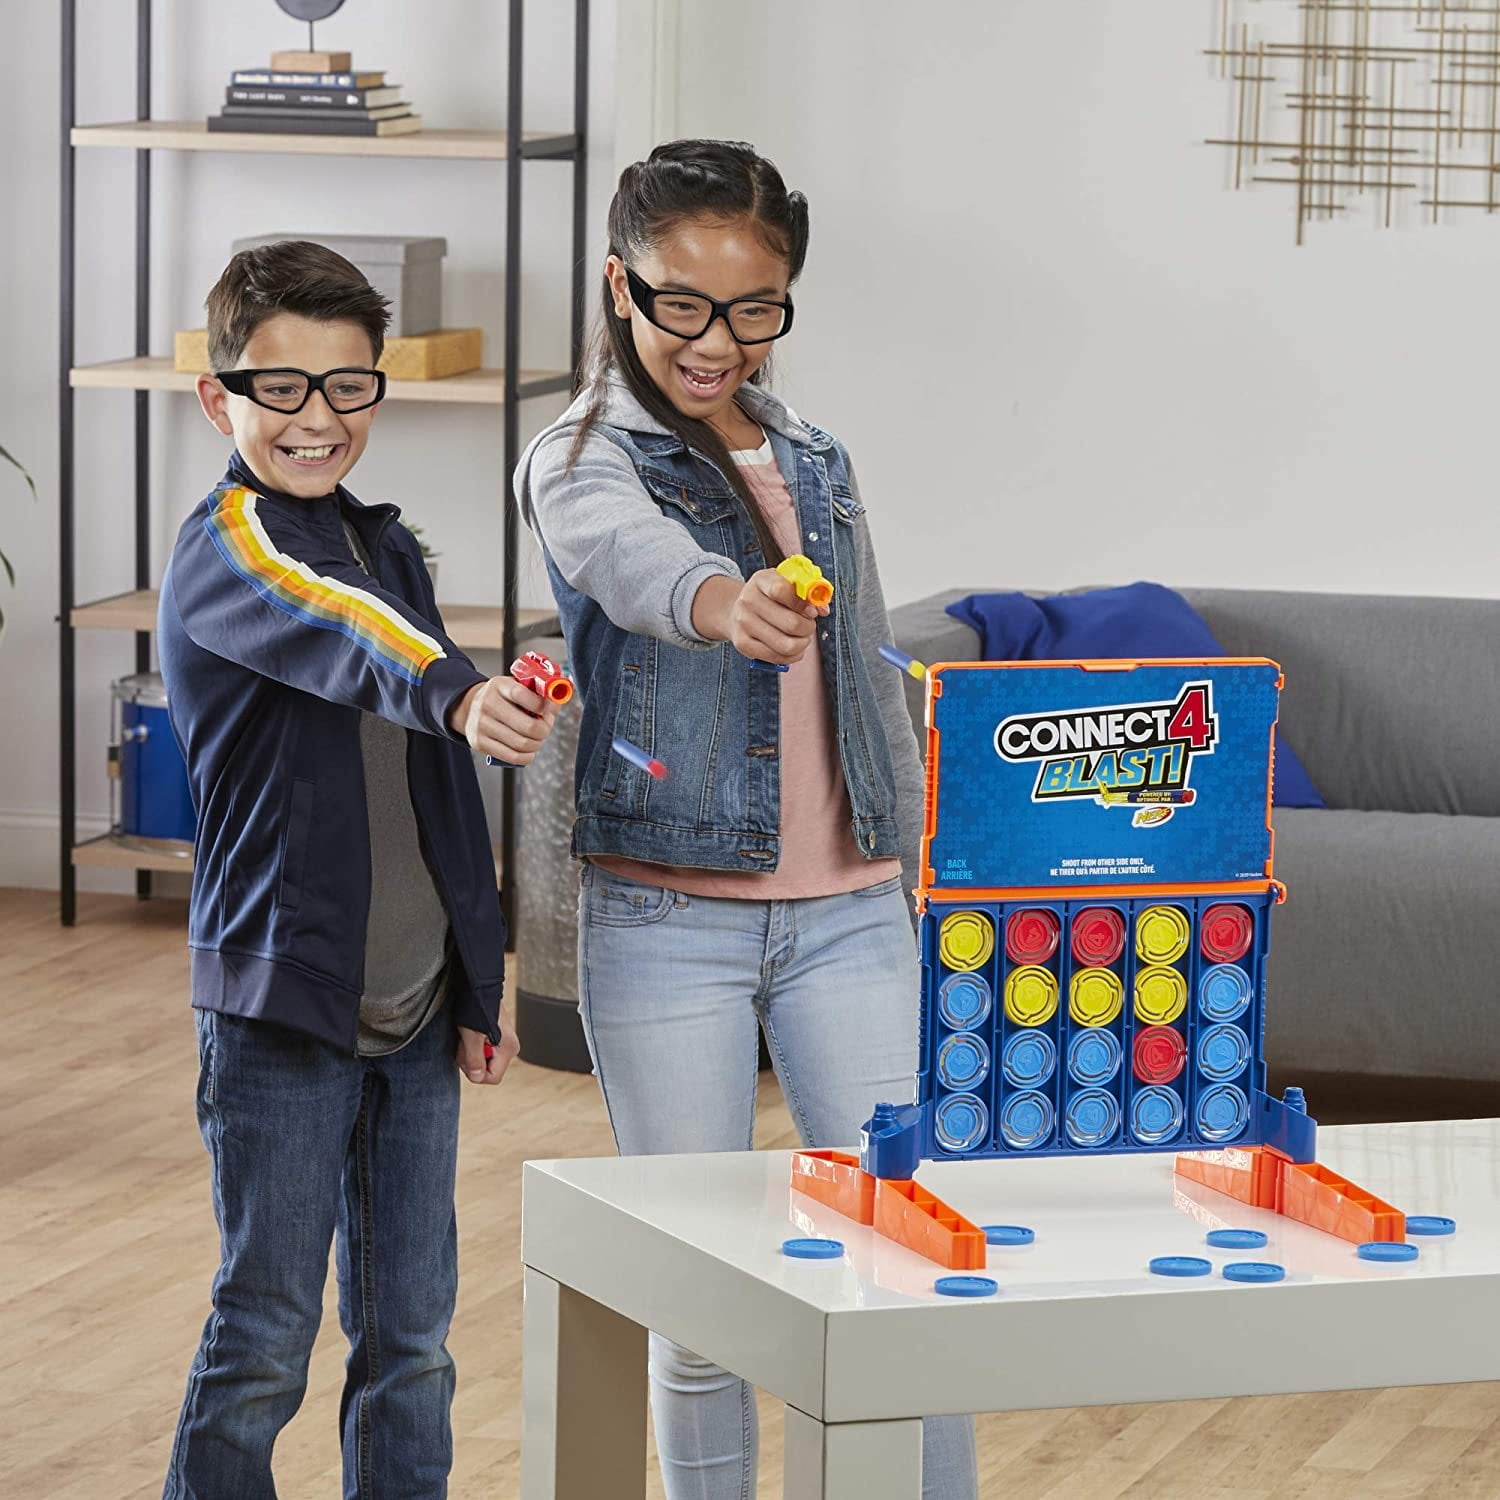 Connect 4 Blast New 2020 Game Review from Hasbro 